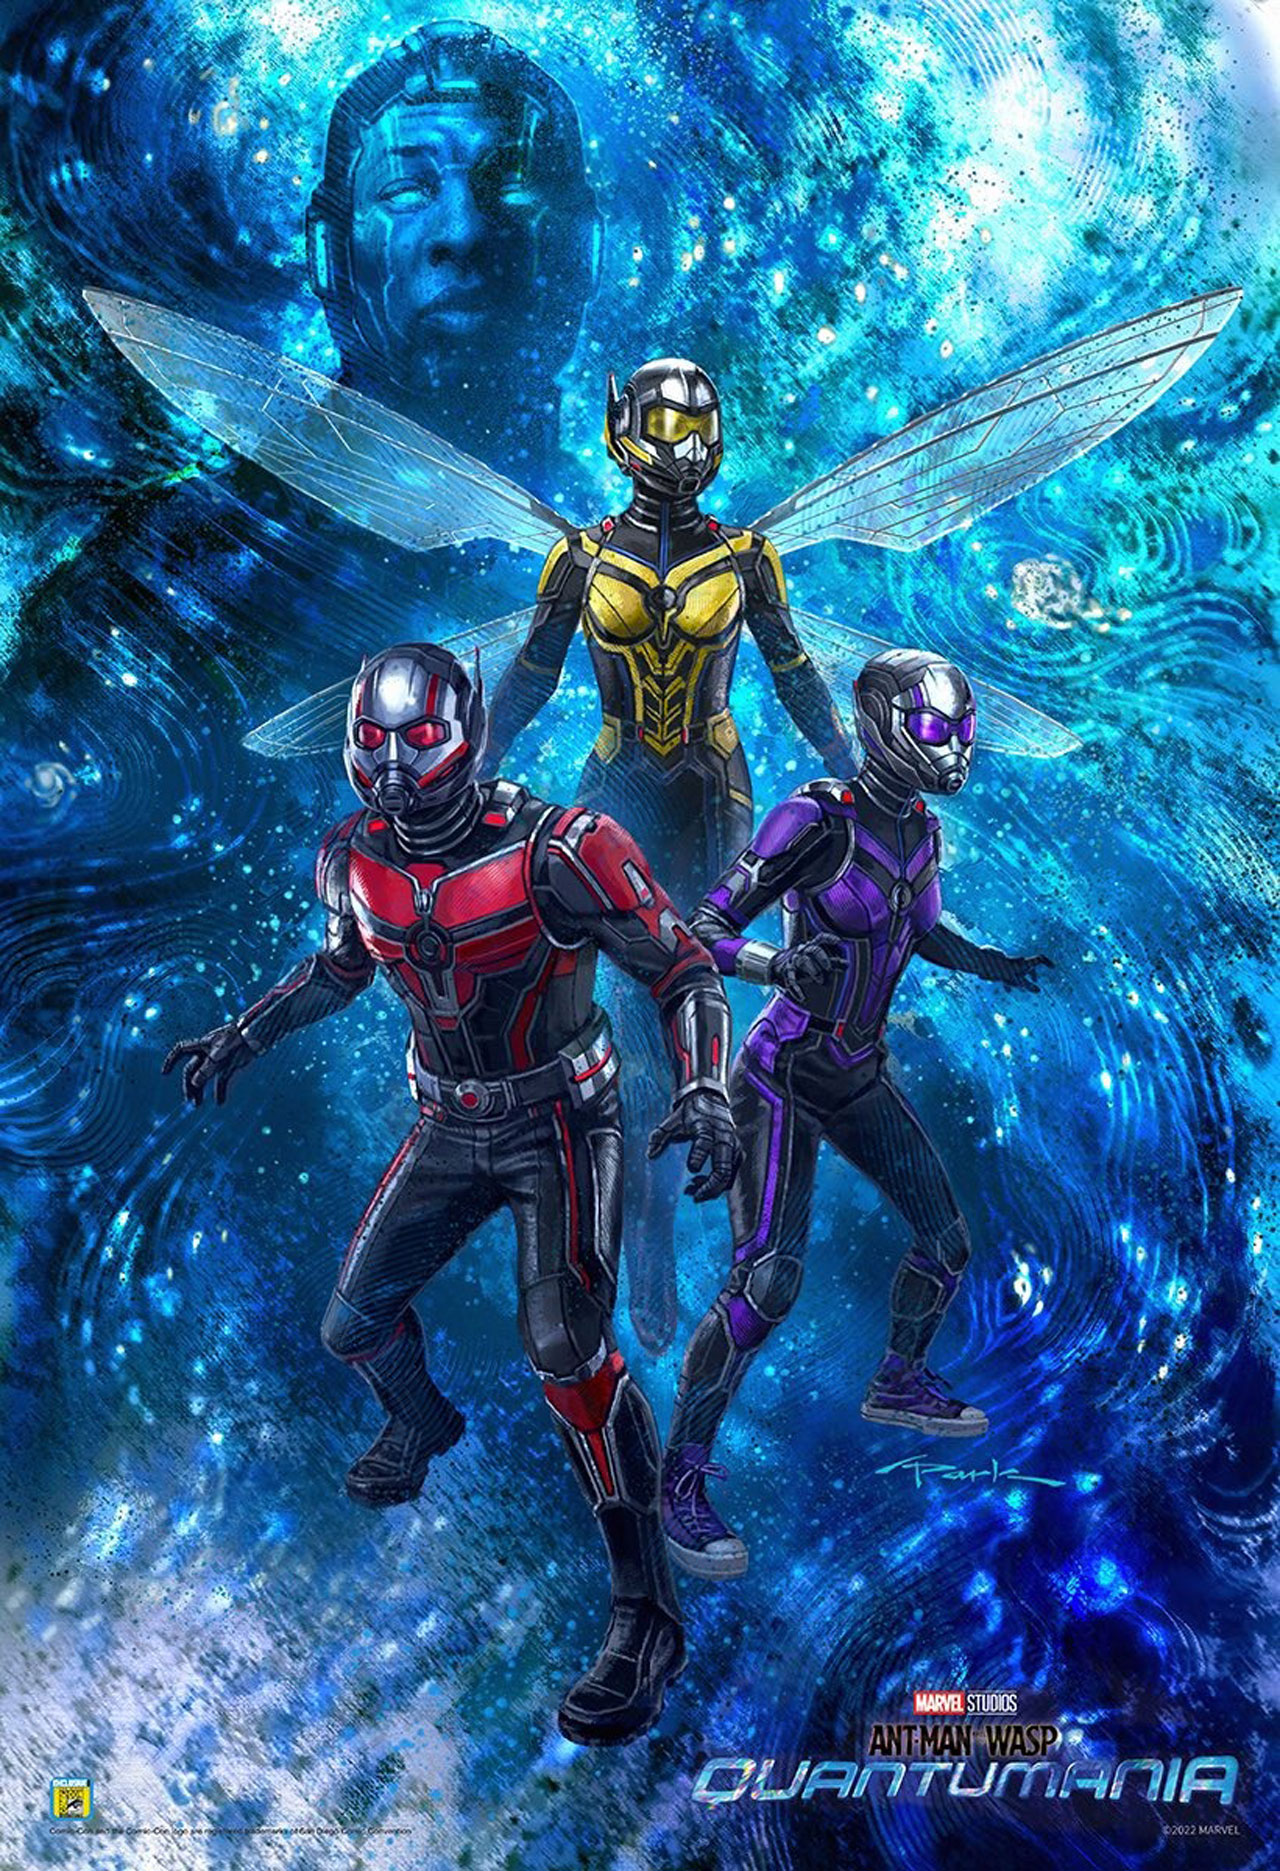 Ant-Man and the Wasp: Quantumania - MPC Film